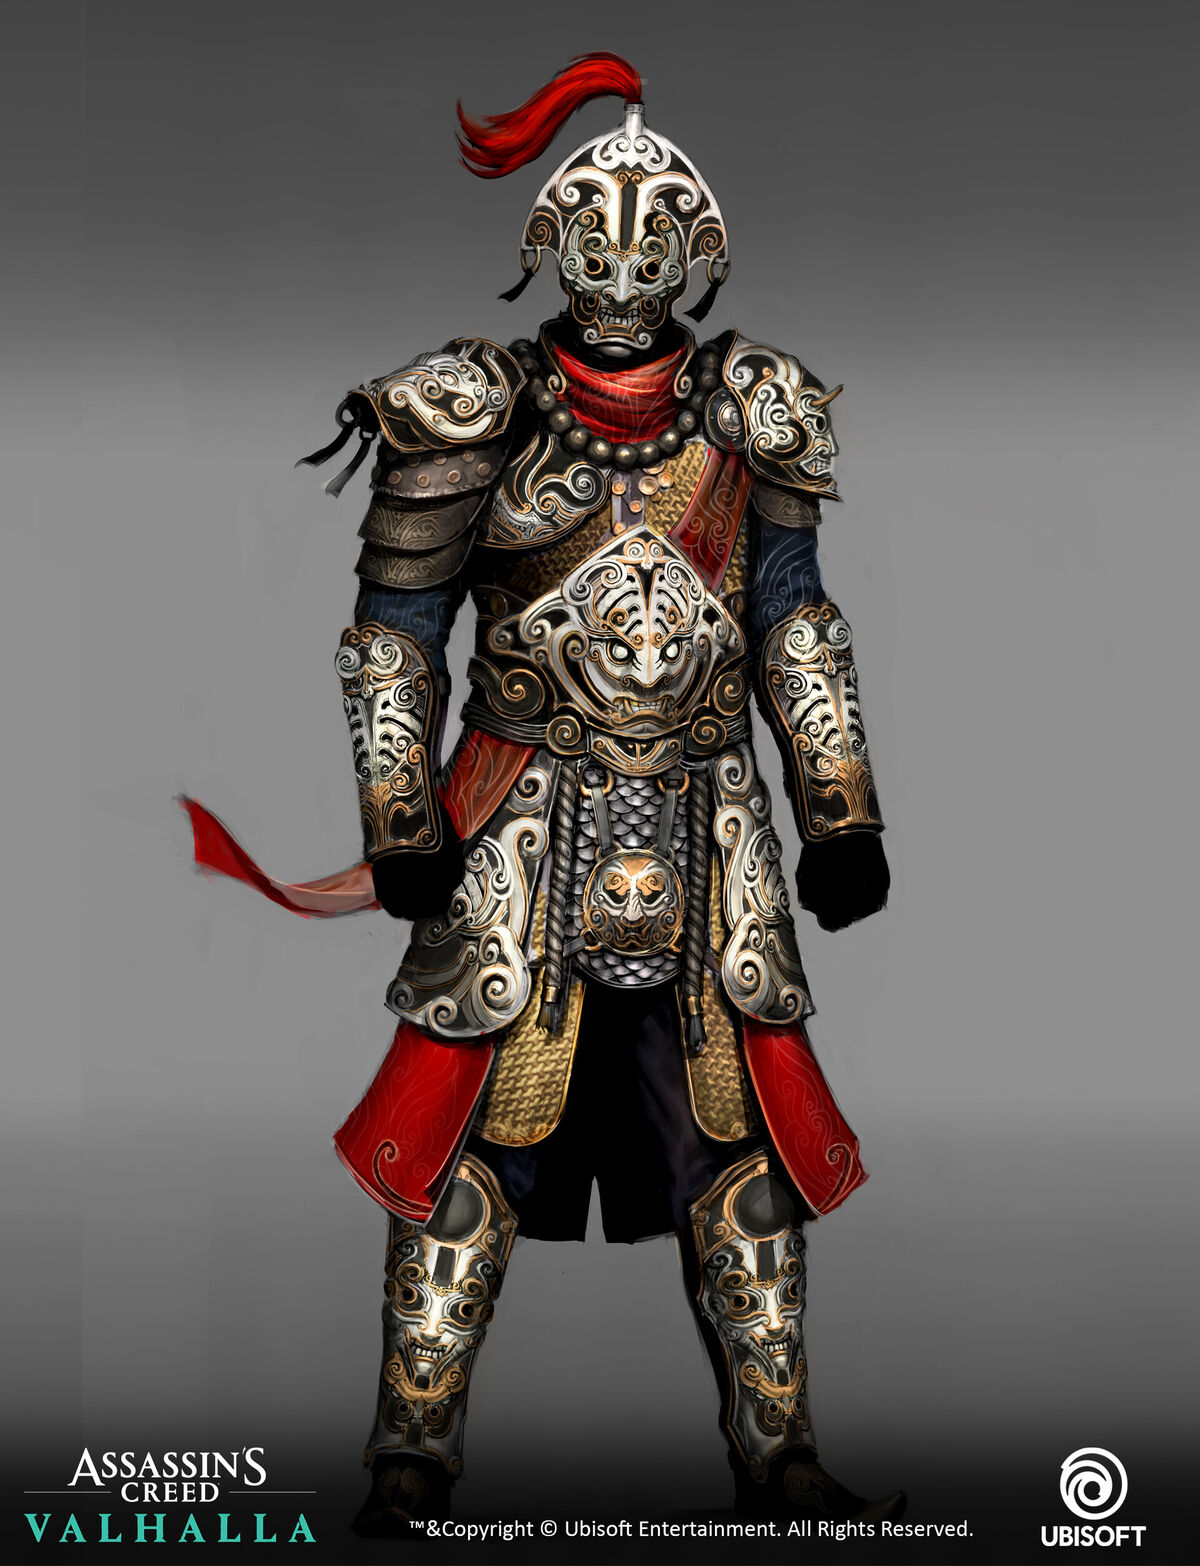 SPOILER! the new free last chapter dlc armor sets : r/ACValhalla